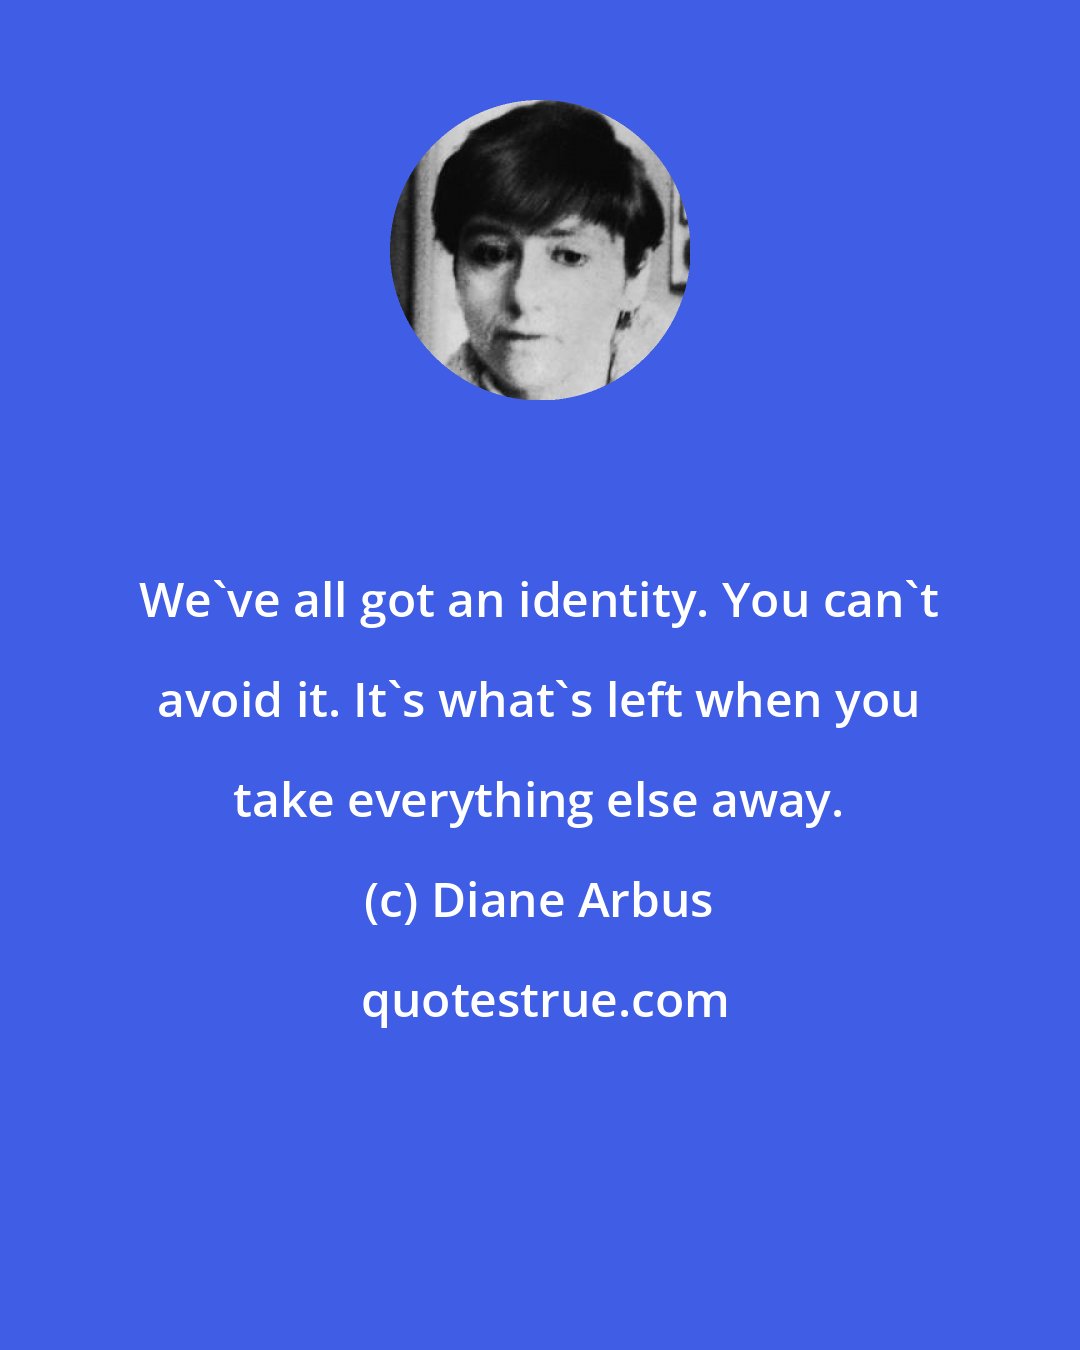 Diane Arbus: We've all got an identity. You can't avoid it. It's what's left when you take everything else away.